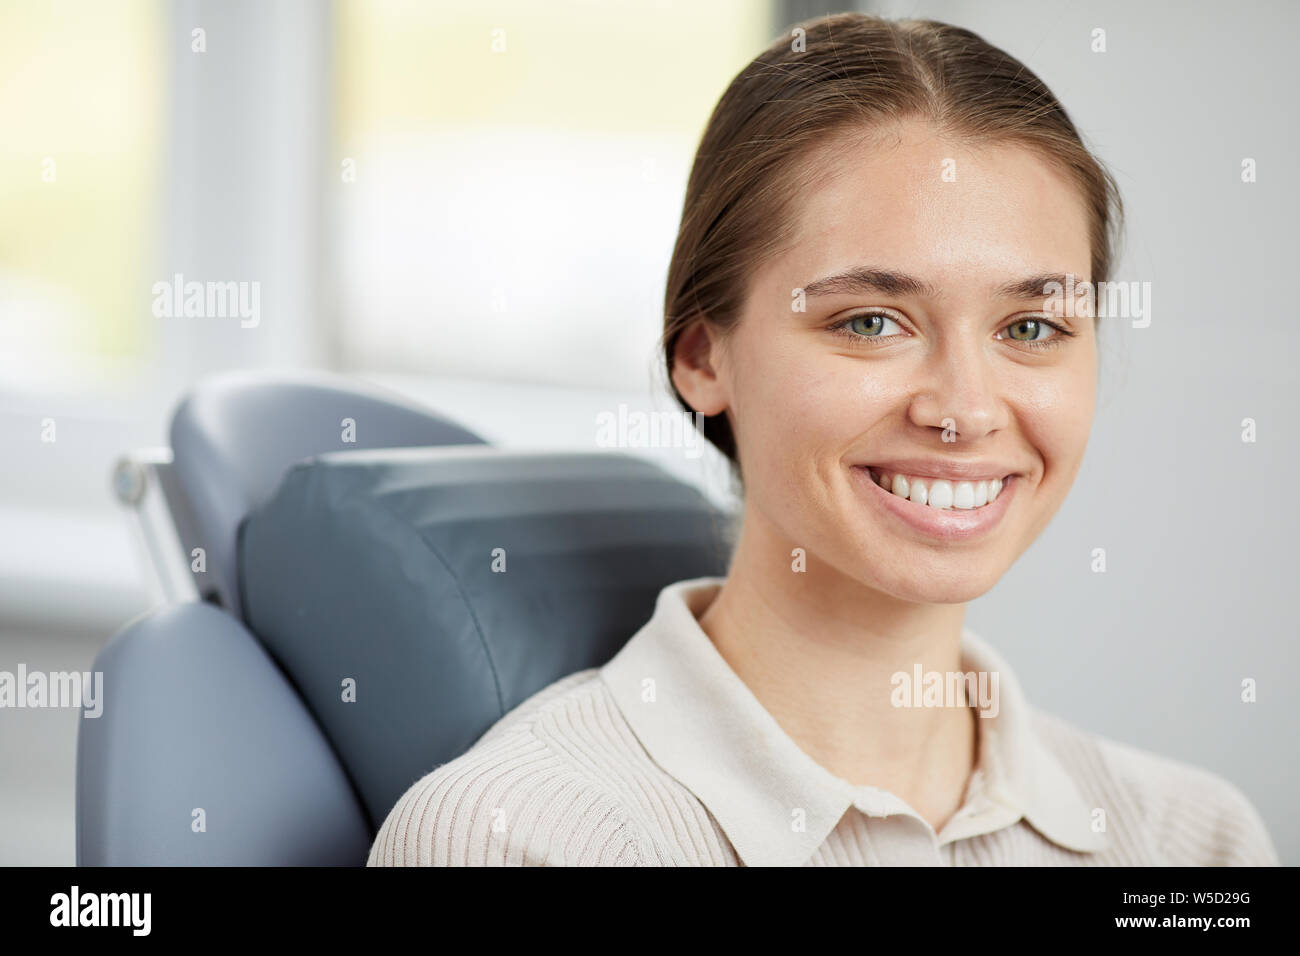 Head and shoulders portrait of pretty young woman smiling at camera and showing perfect white teeth while sitting in dental chair, copy space Stock Photo